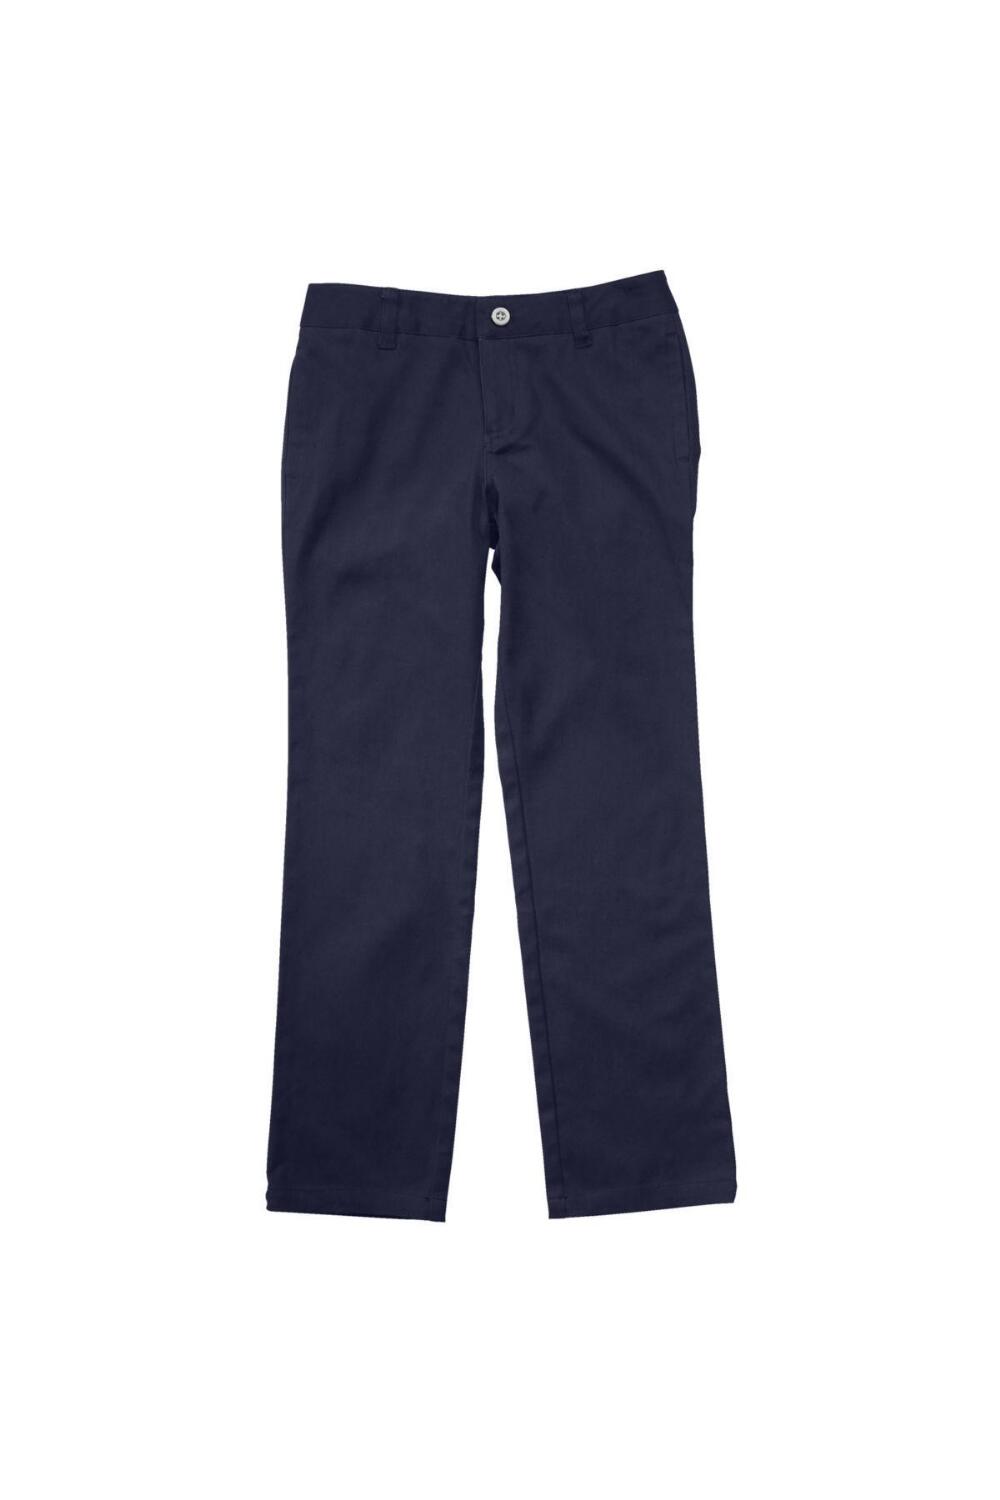 French Toast Girl's Straight Leg Twill Pant (Pant Color: Navy - YLS, Pant Size: Size 4)